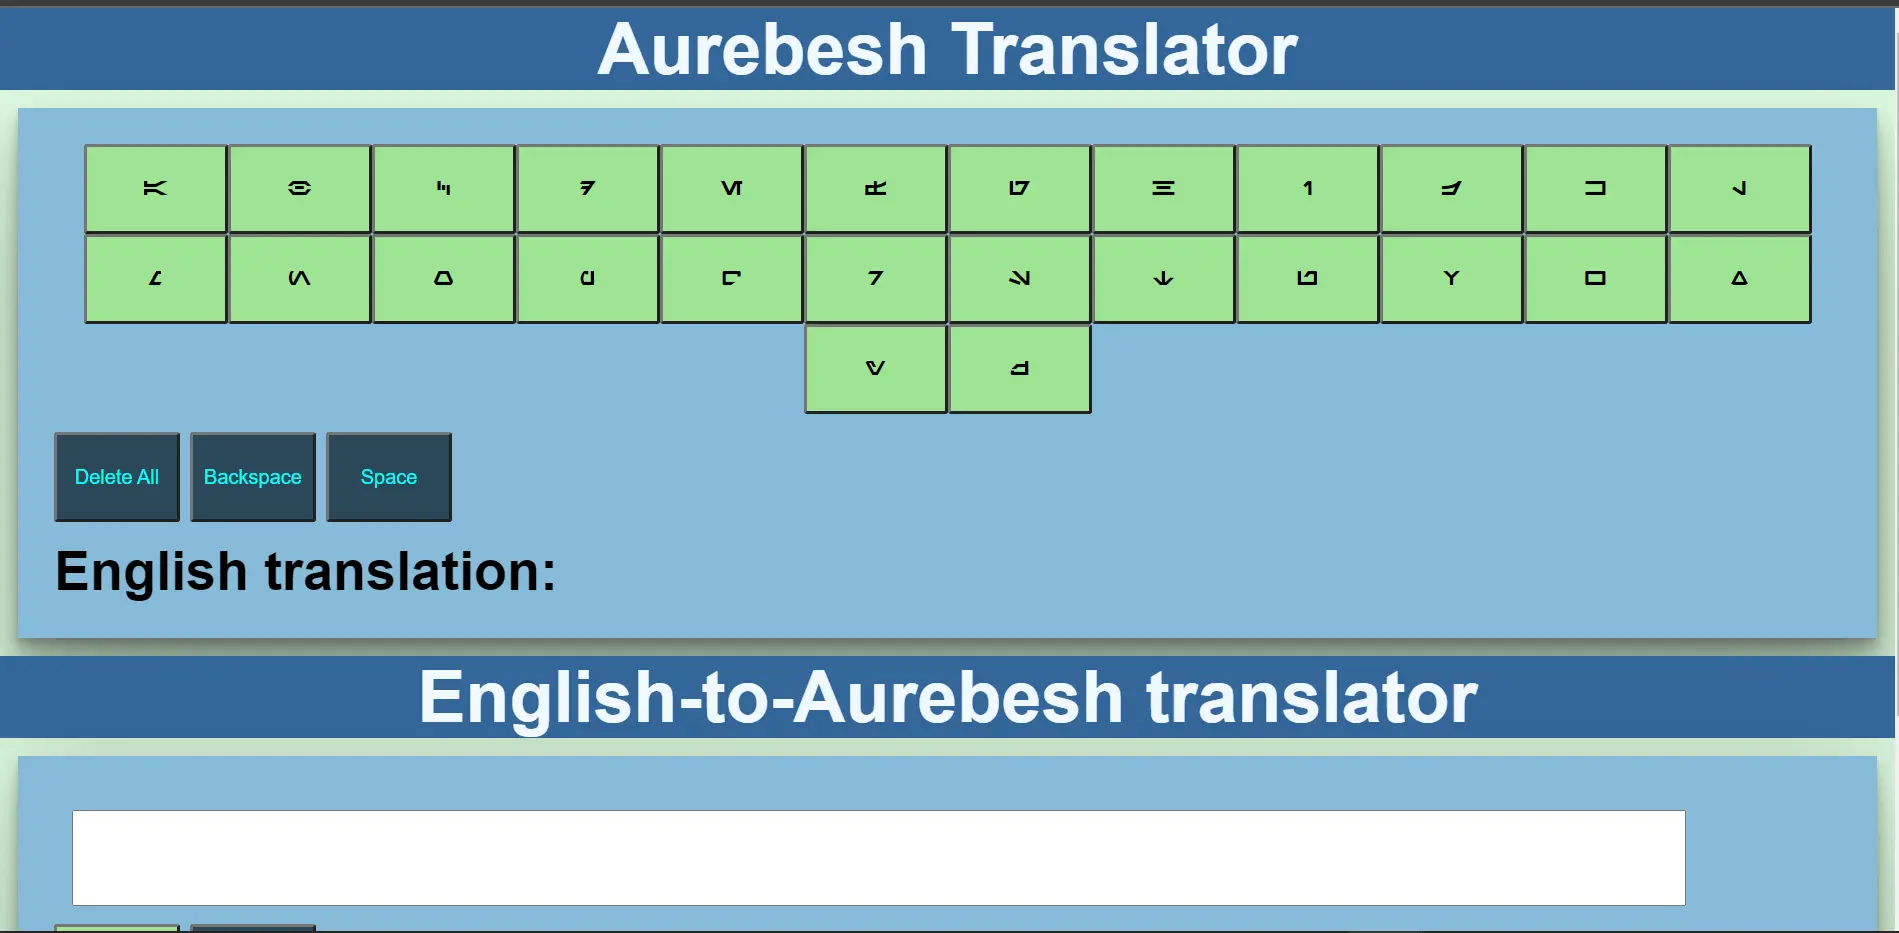 A small HTML/CSS/JS website that helps you translate aurebesh-english and english-aurebesh